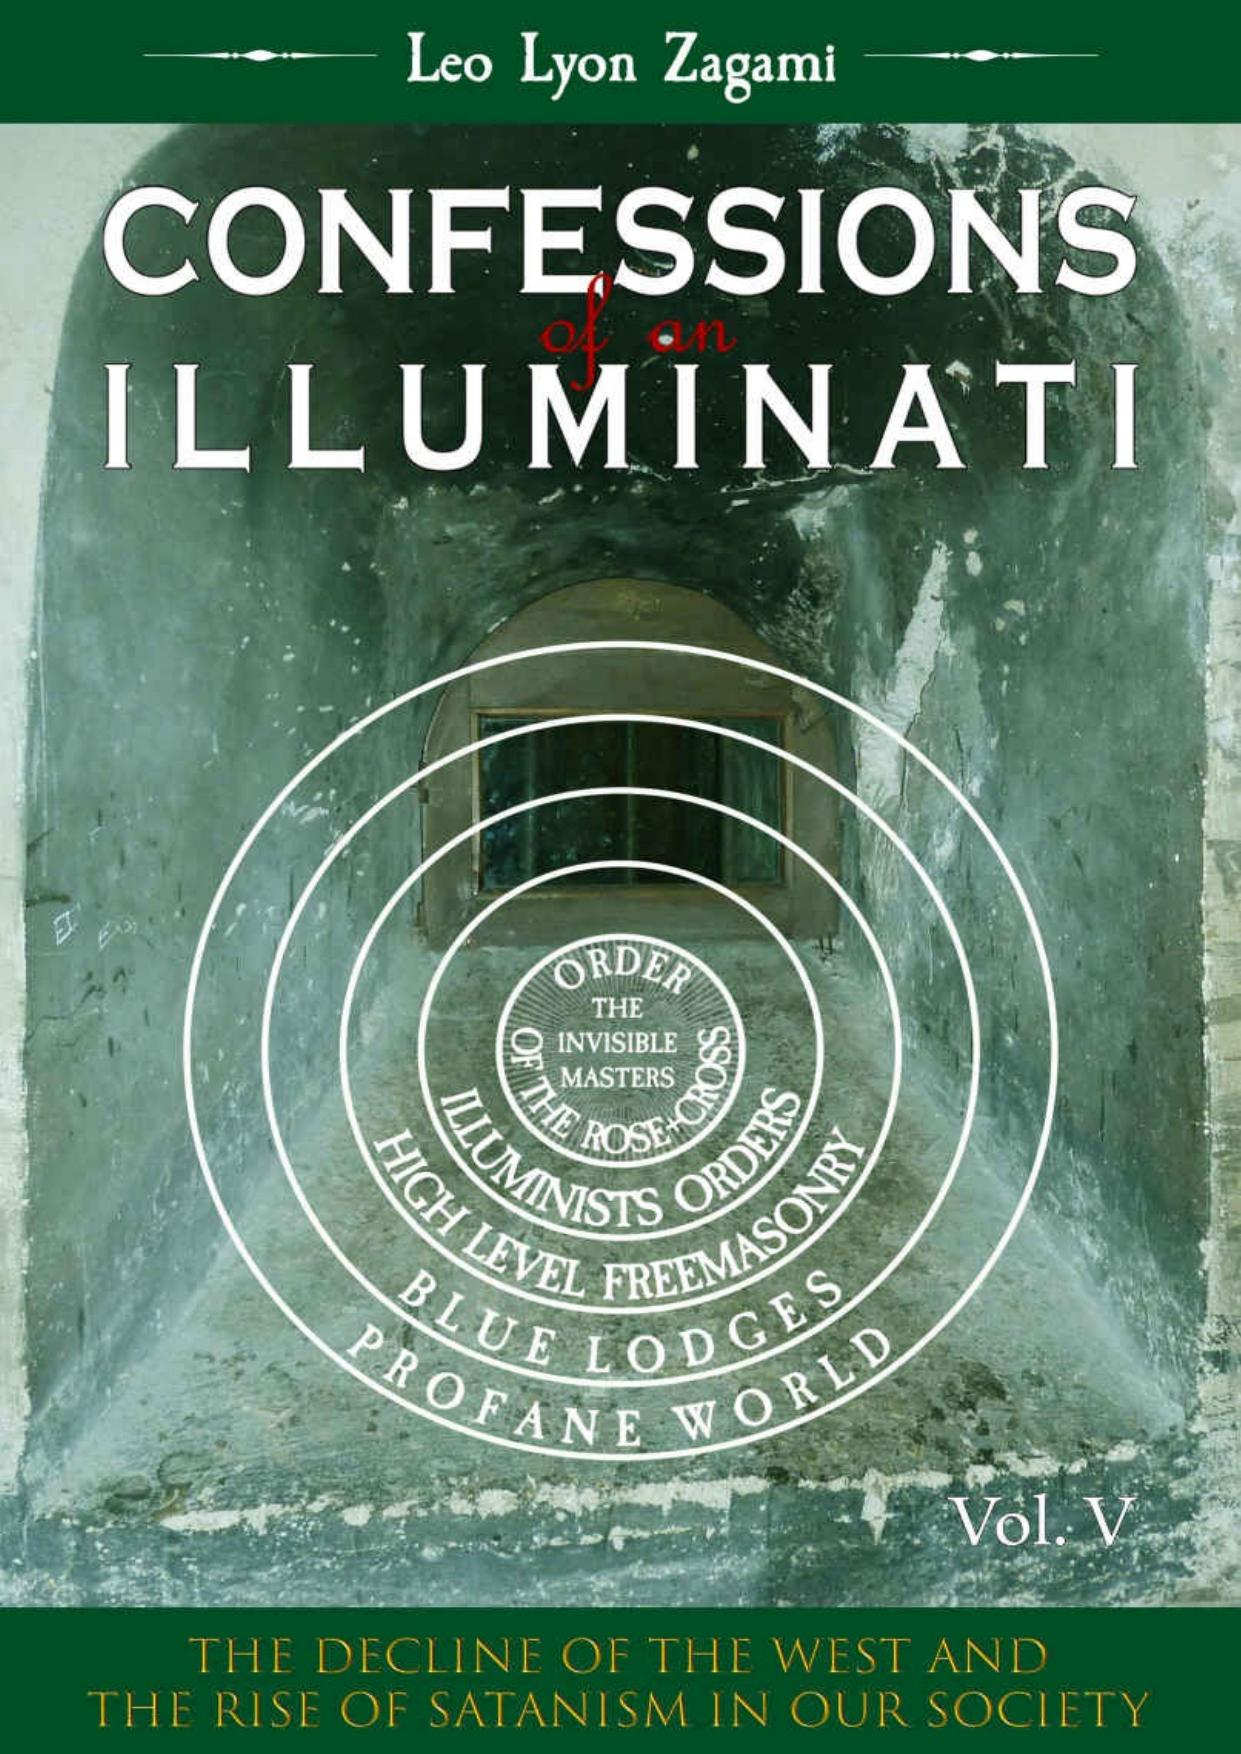 Confessions of an Illuminati Volume 5: The Decline of the West and the Rise of Satanism in Our Society